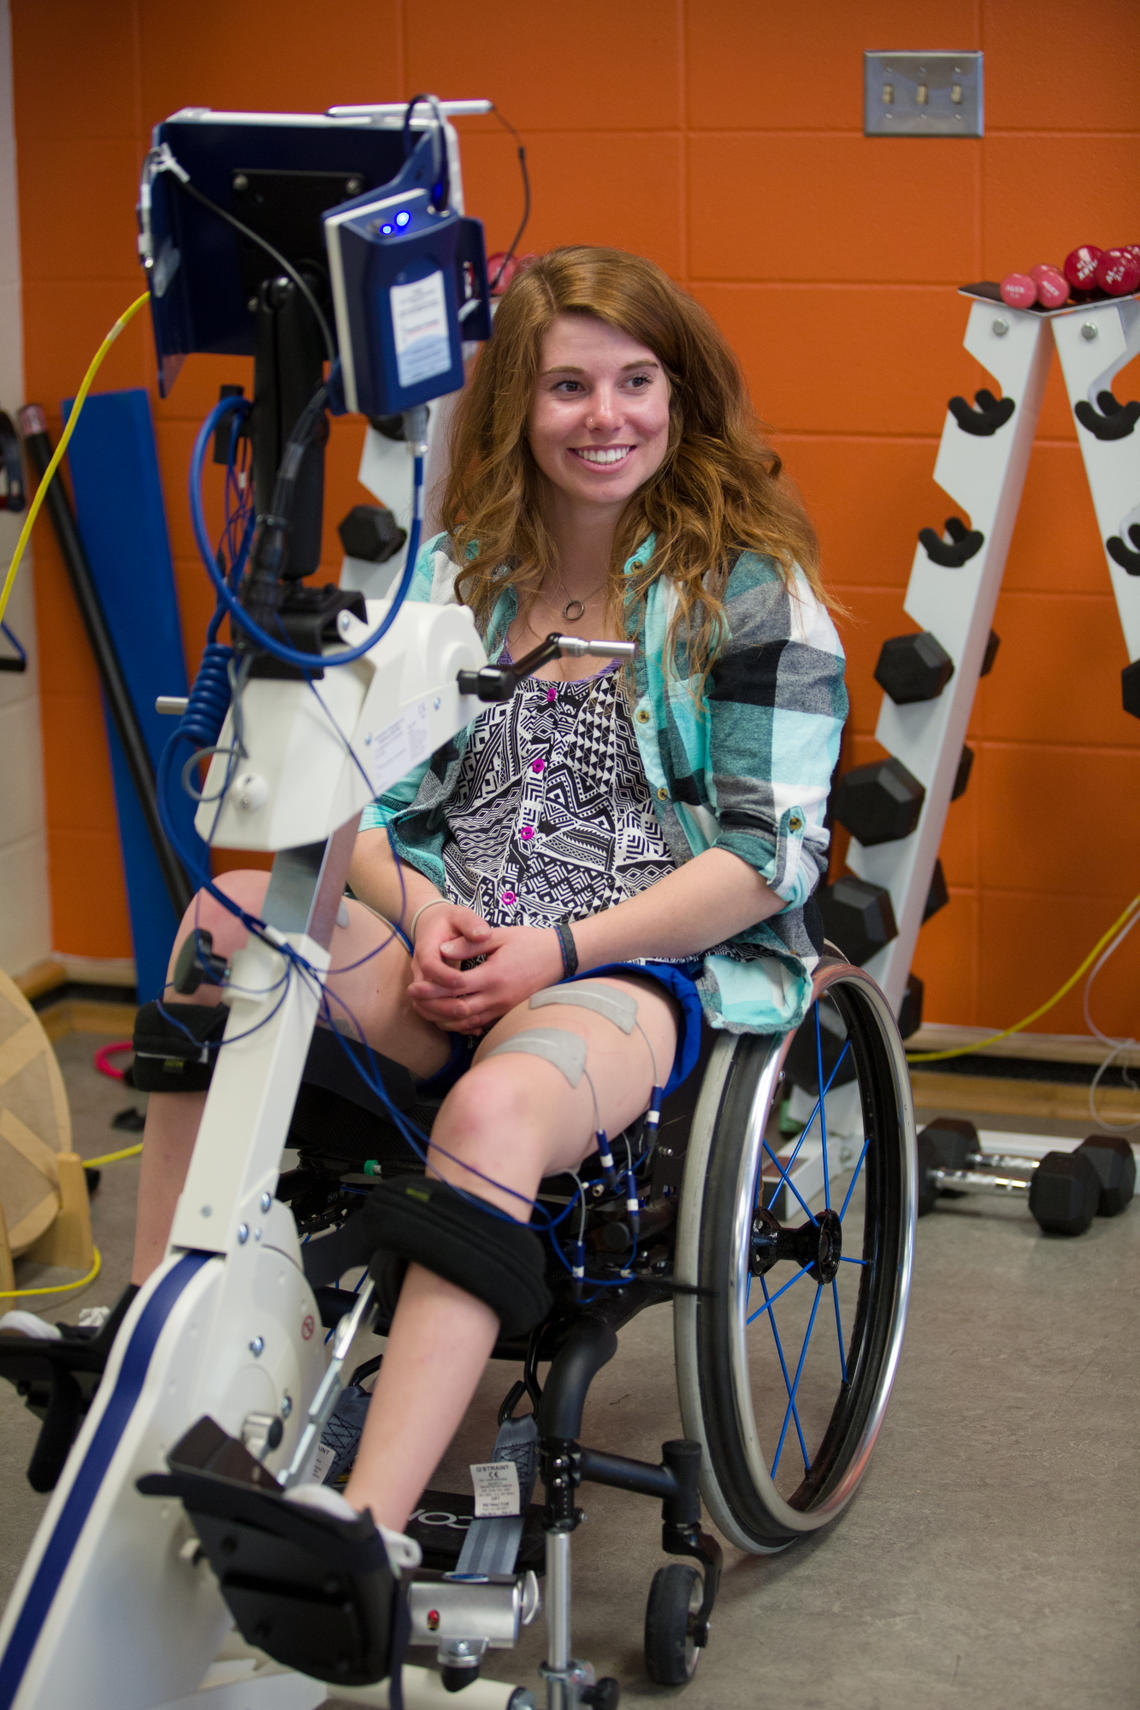 Amanda Timm lost the use of her legs in a skiing accident four years ago.